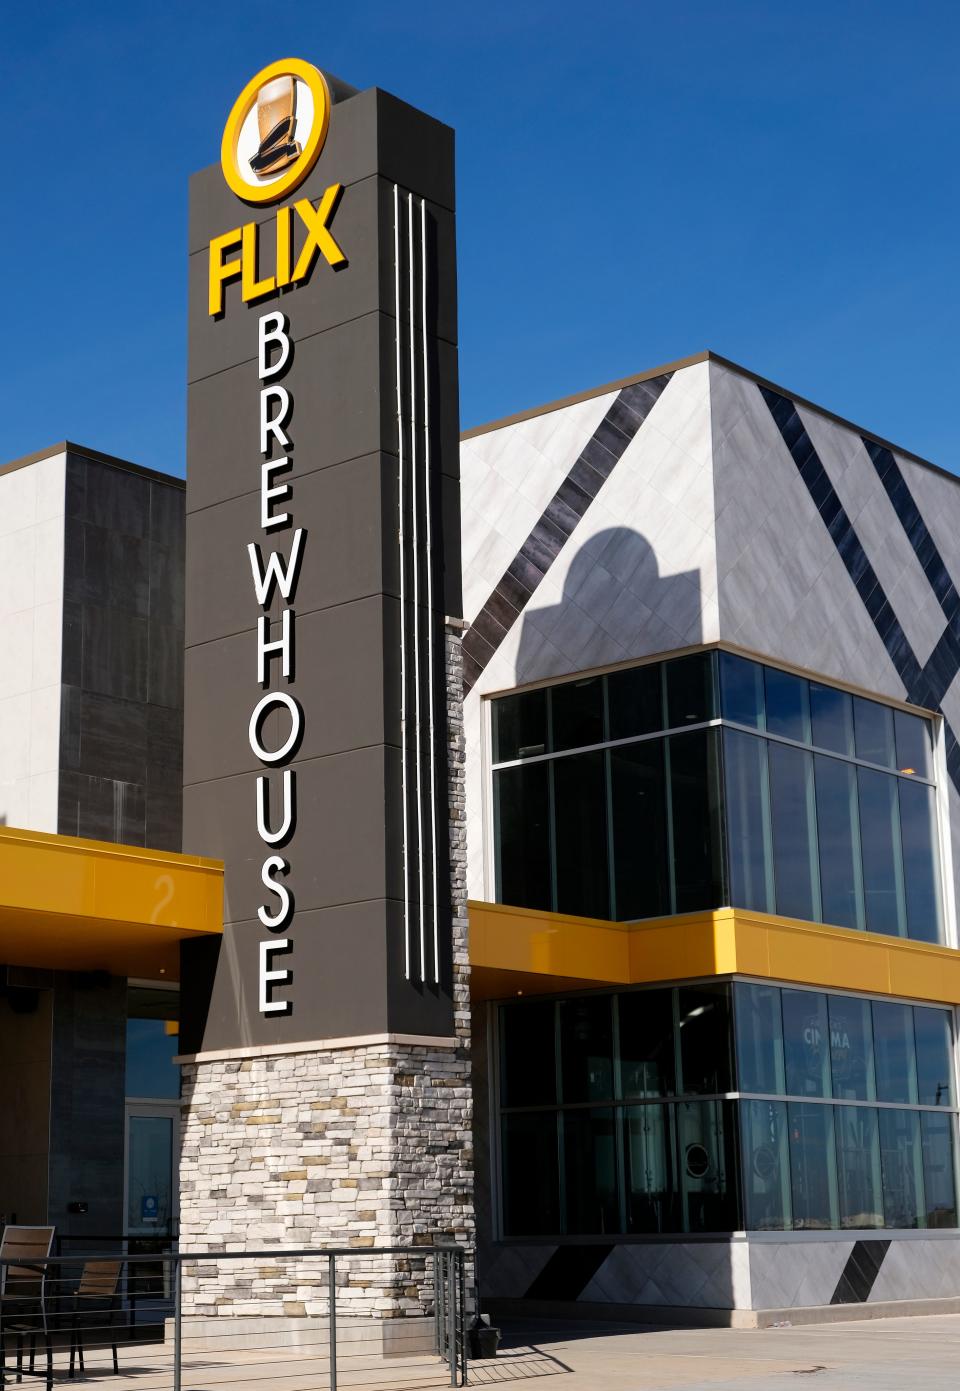 Flix Brewhouse is an anchor at The Half, a mixed use development at 8590 Broadway Extension.